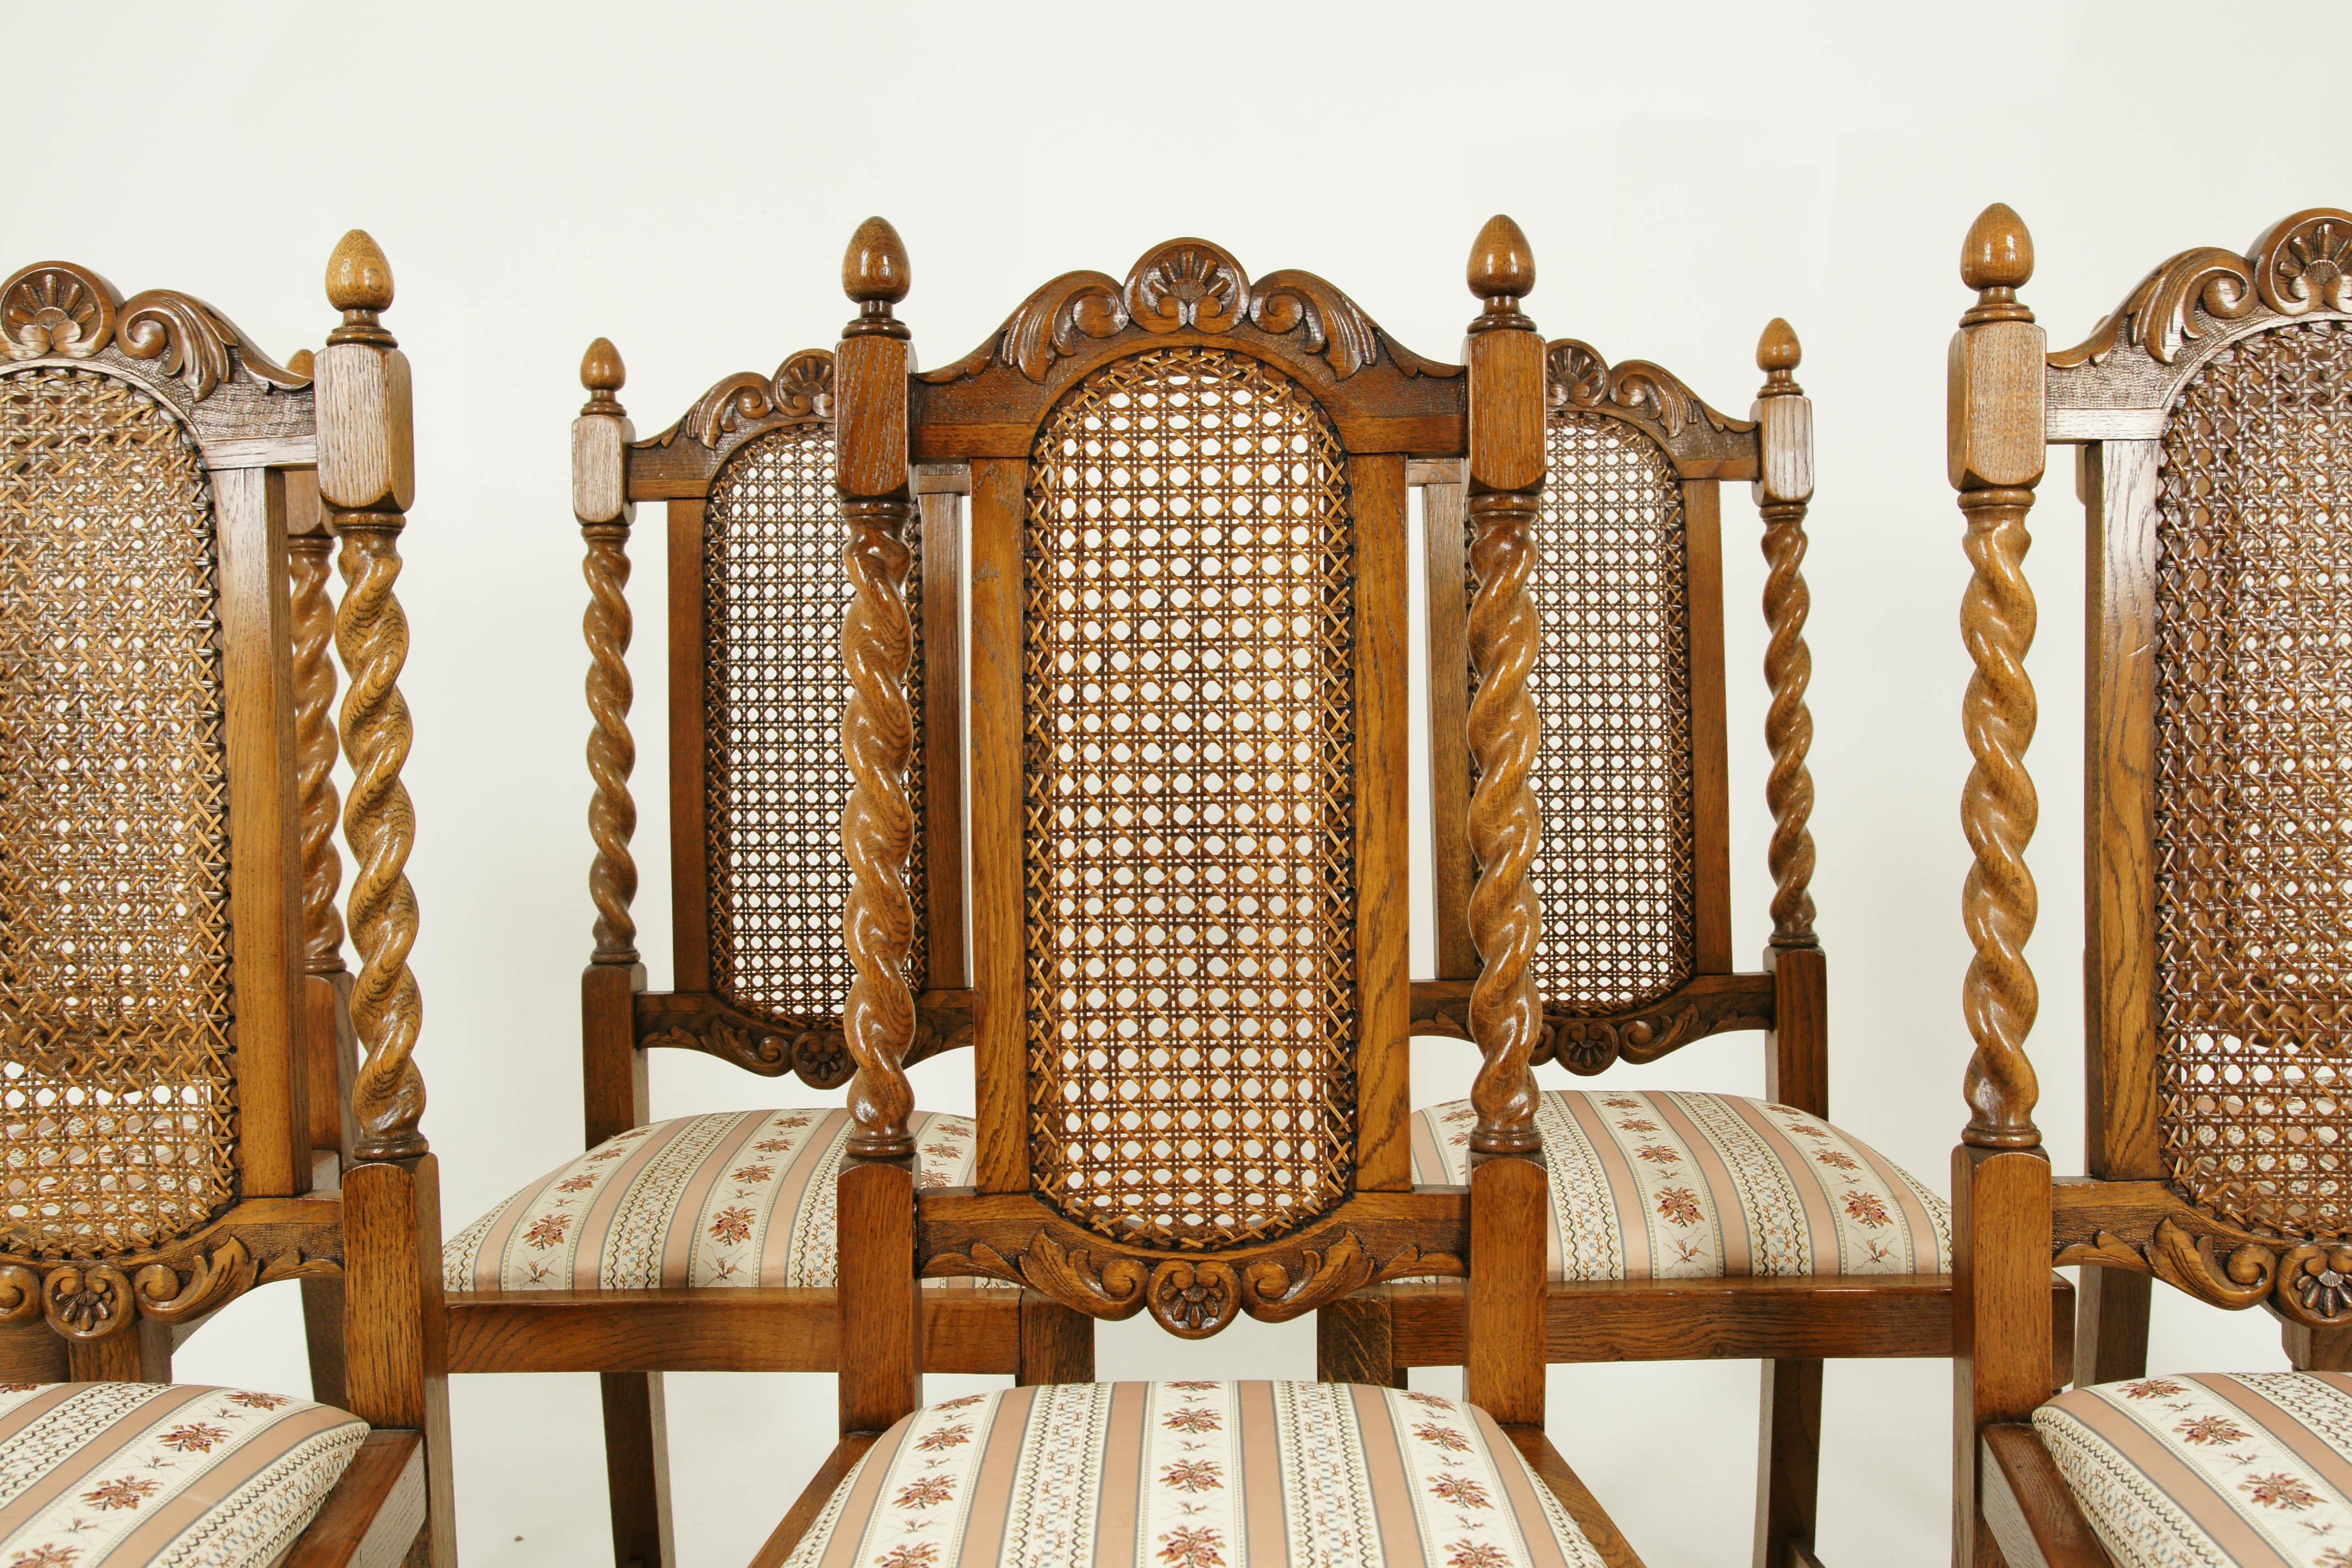 Eight dining chairs, cane back chairs, Barley Twist chairs, Scotland, 1920, B1534

Scotland, 1920
Solid oak
Refinished in the last 20 years
Carved rail
Cane backs
Barley twist supports with finial top
Refinished pop out seat cushions
Barley